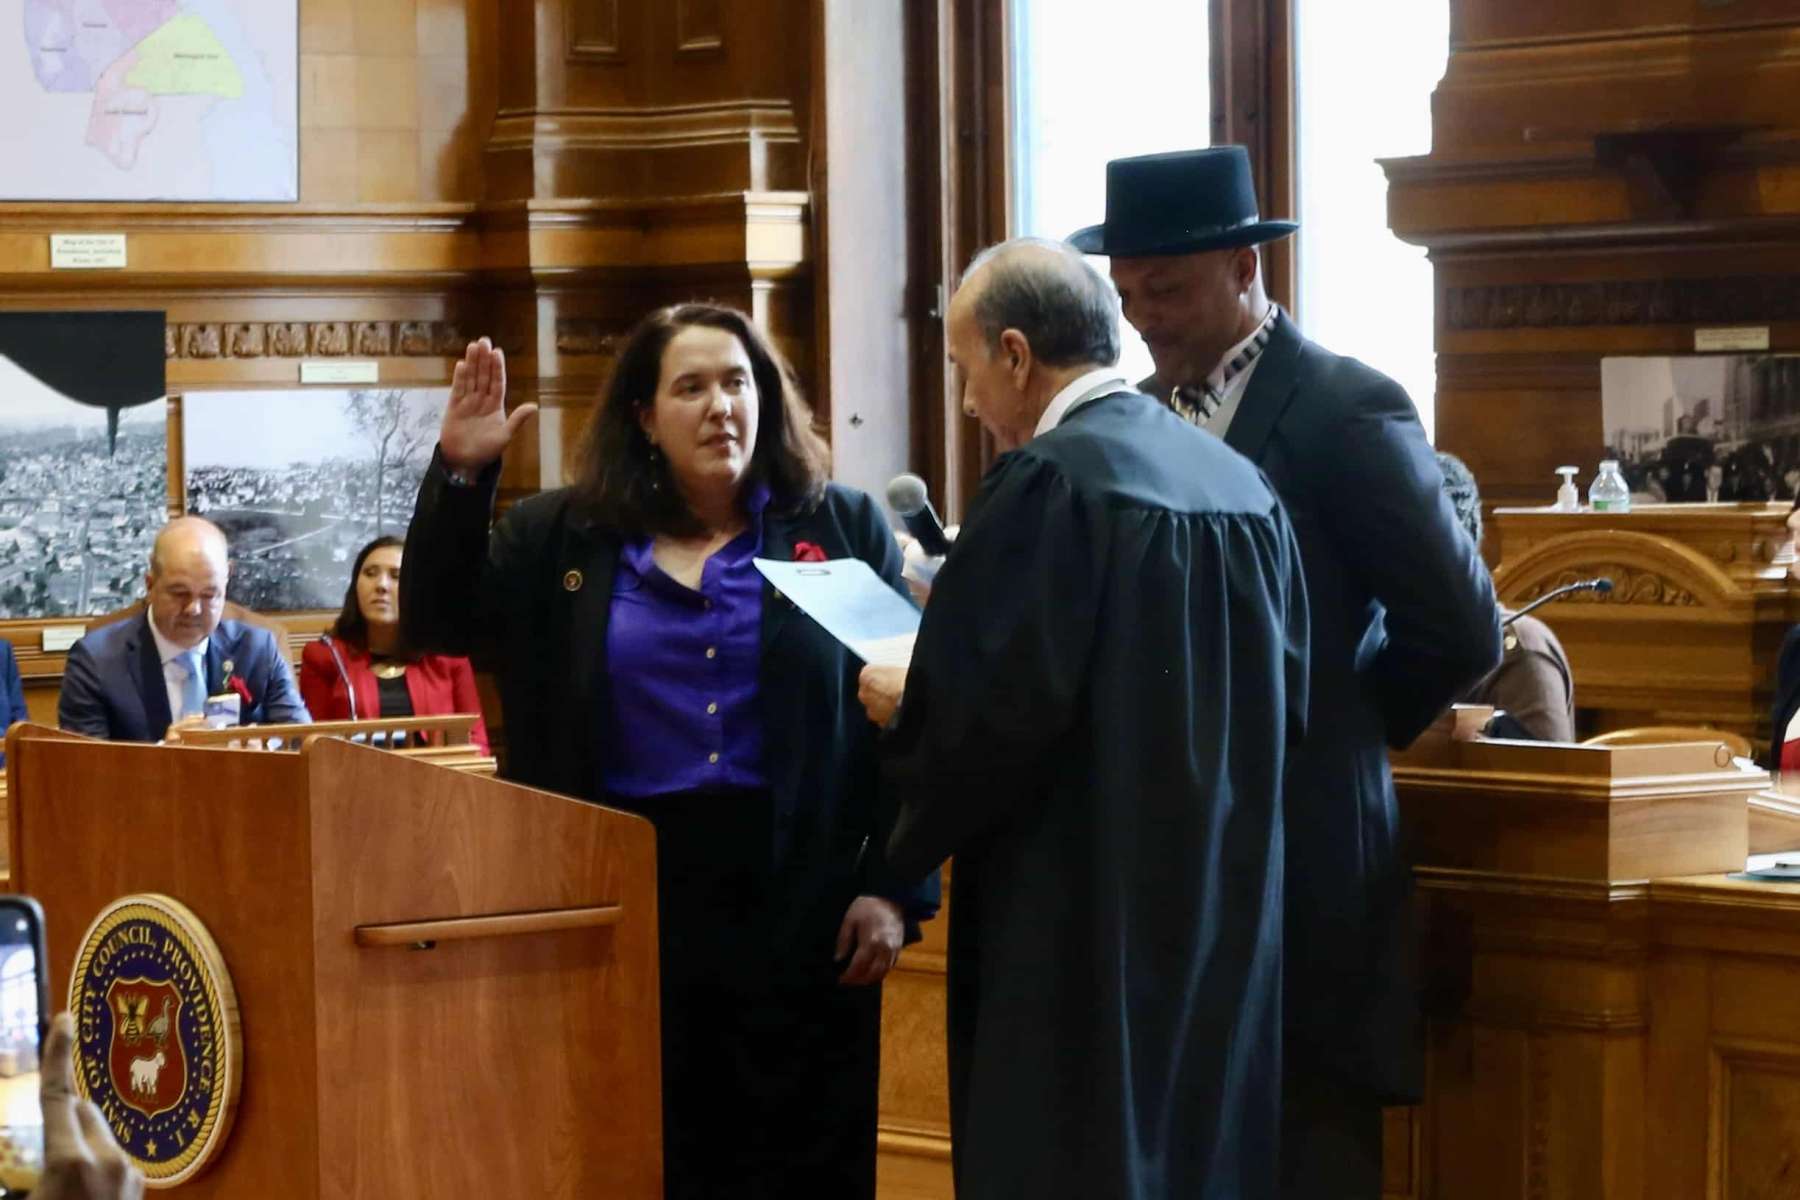 Rachel Miller elected as Providence City Council President in historic first